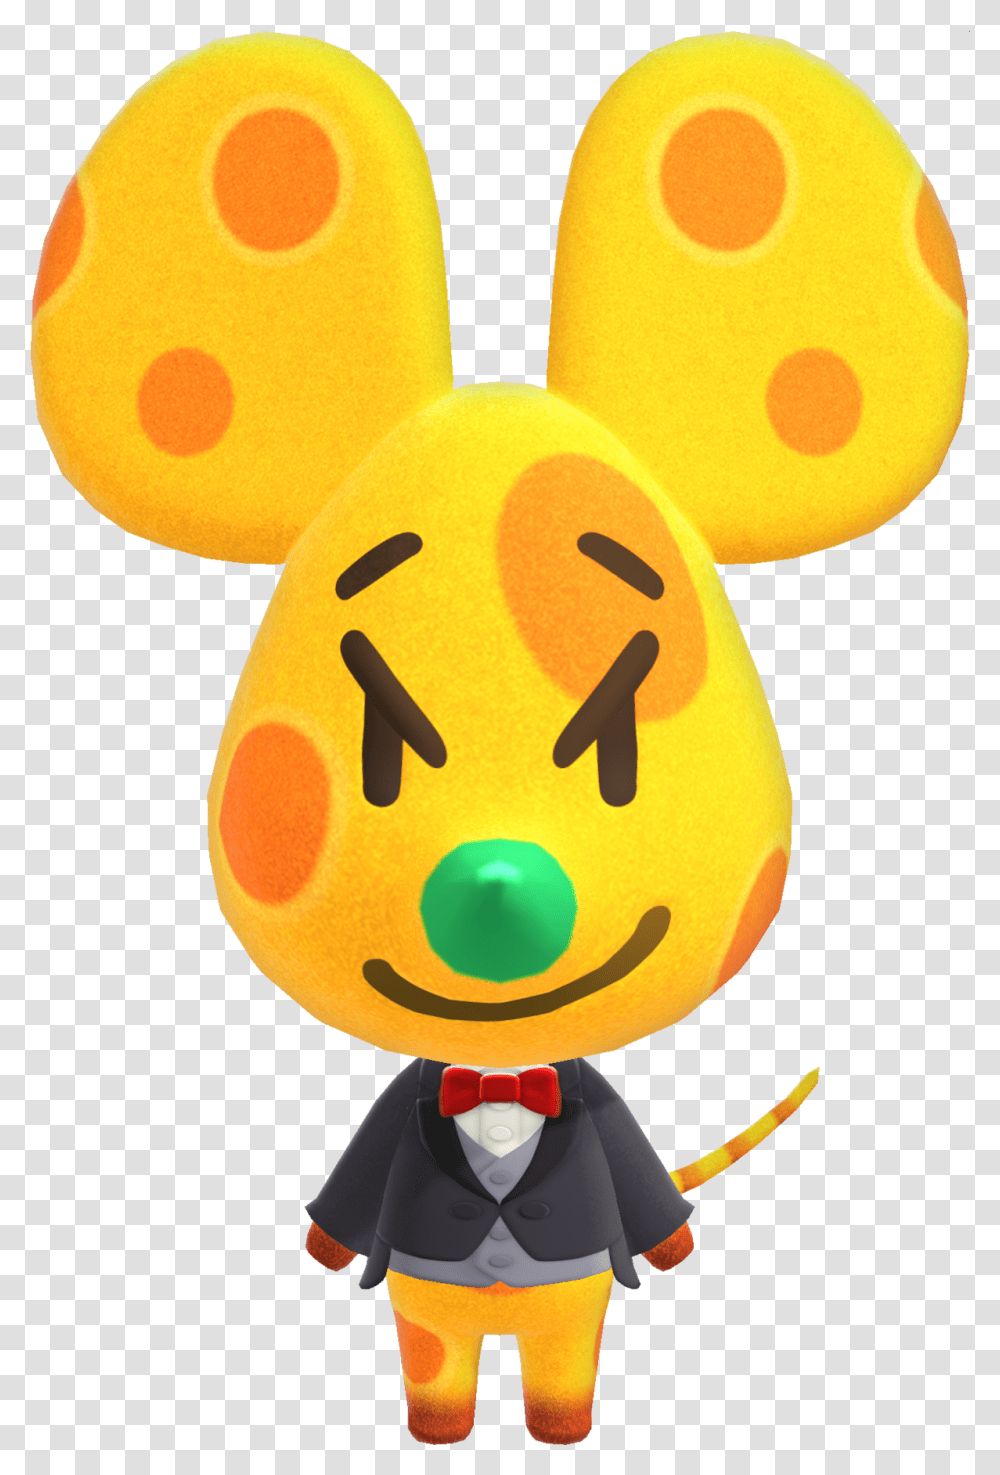 Chadder Nookipedia The Animal Crossing Wiki Chadder Animal Crossing, Sweets, Food, Confectionery, Pac Man Transparent Png